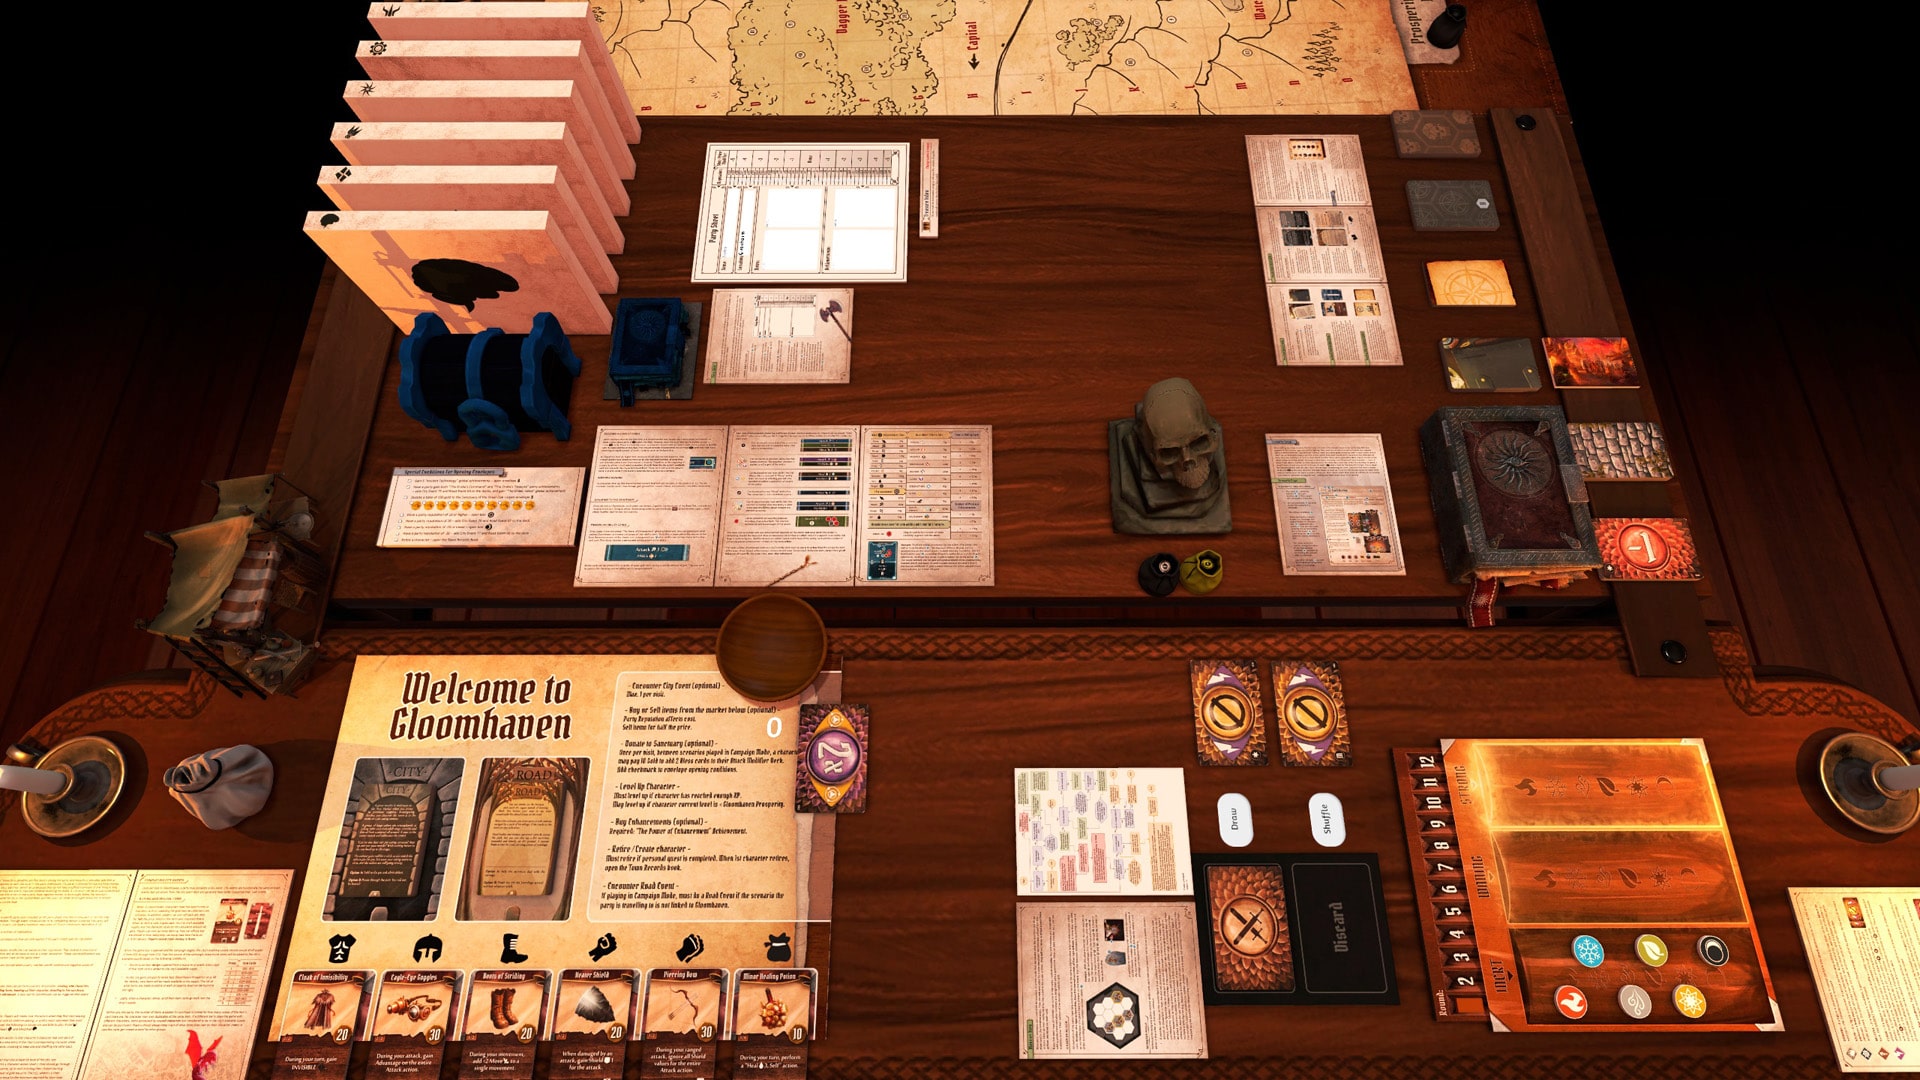 A complex setup of Gloomhaven game showing detailed miniatures, cards, and board, illustrating the depth and strategy of the game.